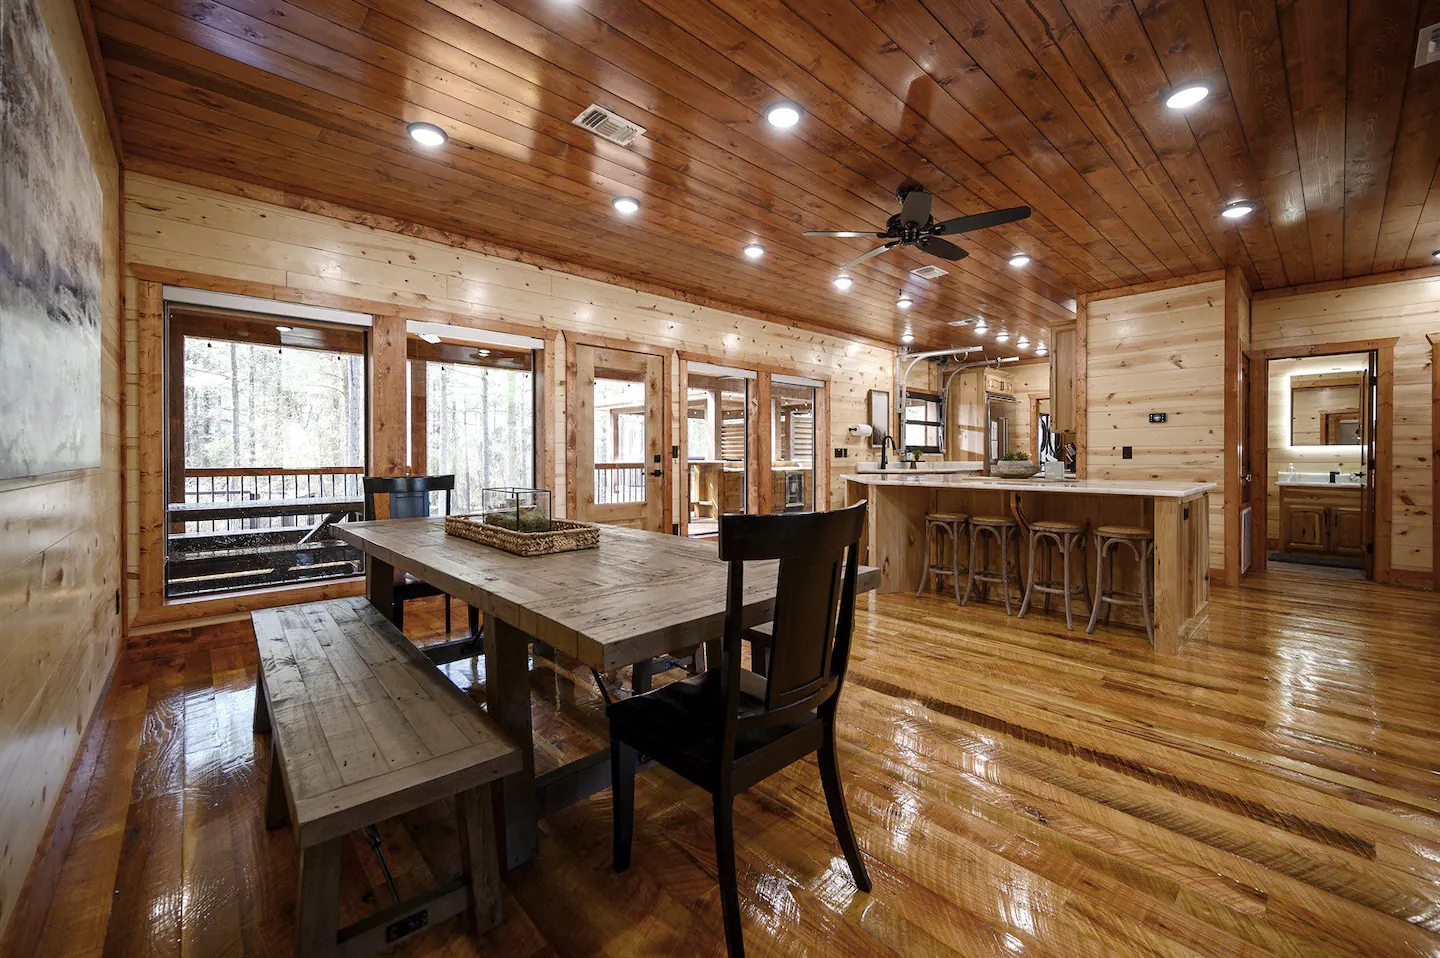 There is a spacious kitchen table that offers plenty of room for meals and gatherings.